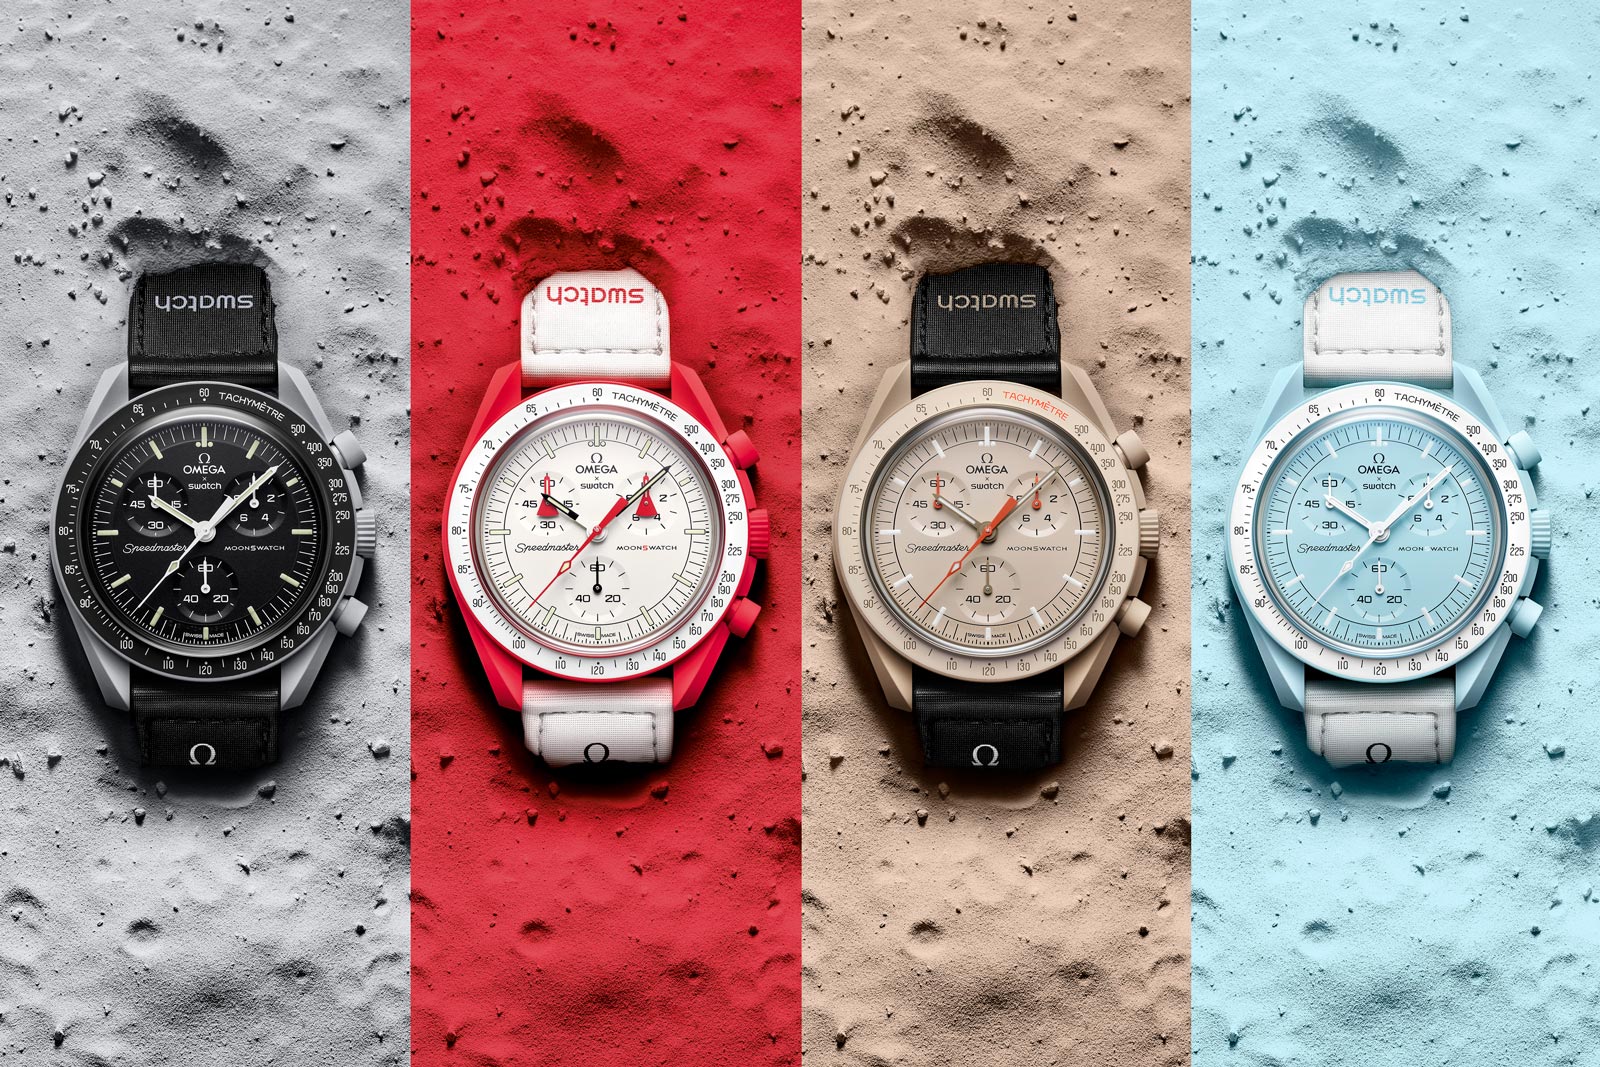 Speedmaster moonwatch x swatch omega Omega and